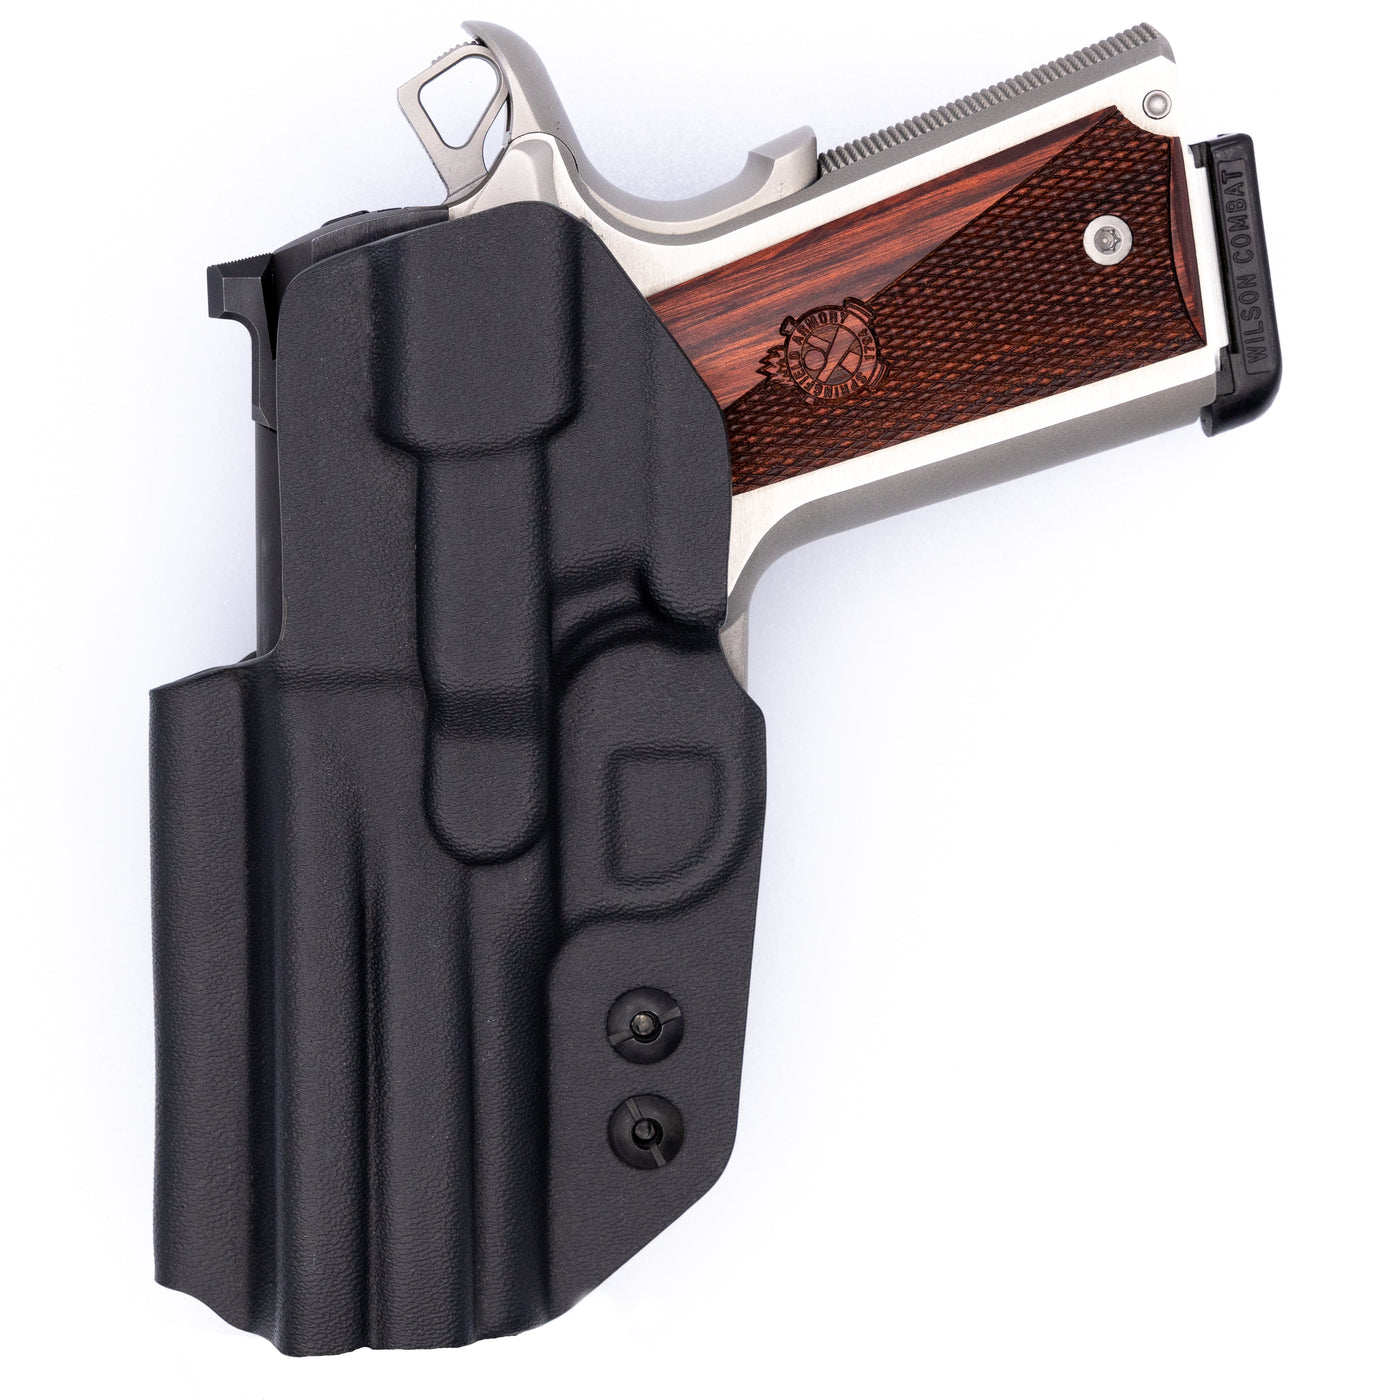 Shown is a custom C&G Holster Covert series inside the waistband holster for a Ruger SR1911.